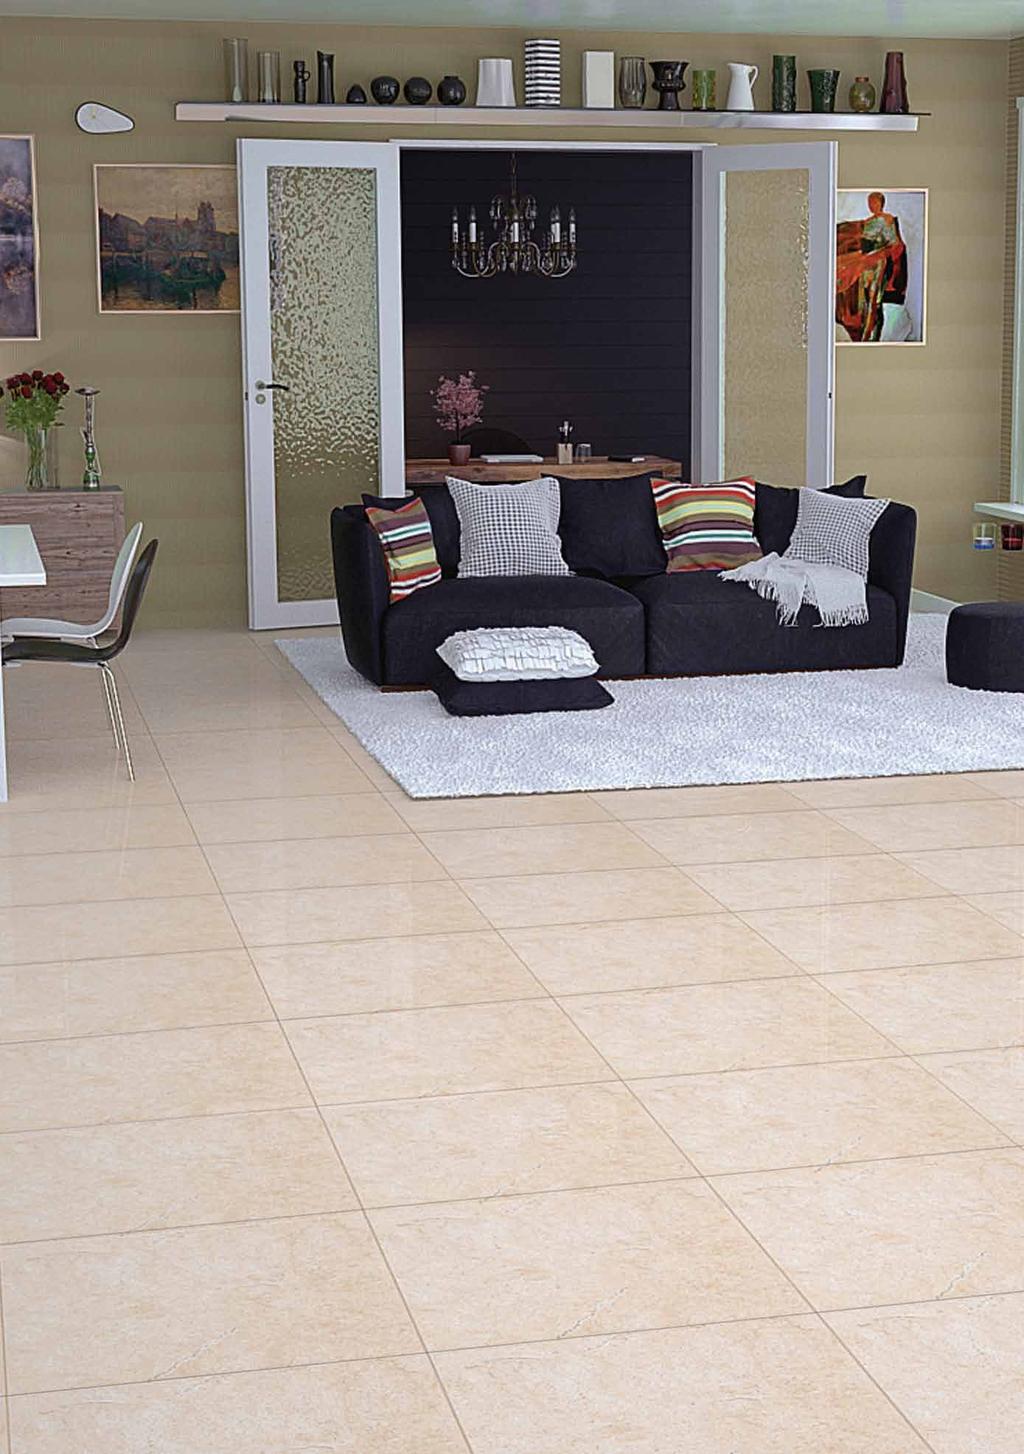 THE STAR 60x60 cm Polished NANO TECH New Shades of THE STAR 60 x 60 cm They are the most popular among all tiles. They add phenomenal style with their high-gloss polished feel.